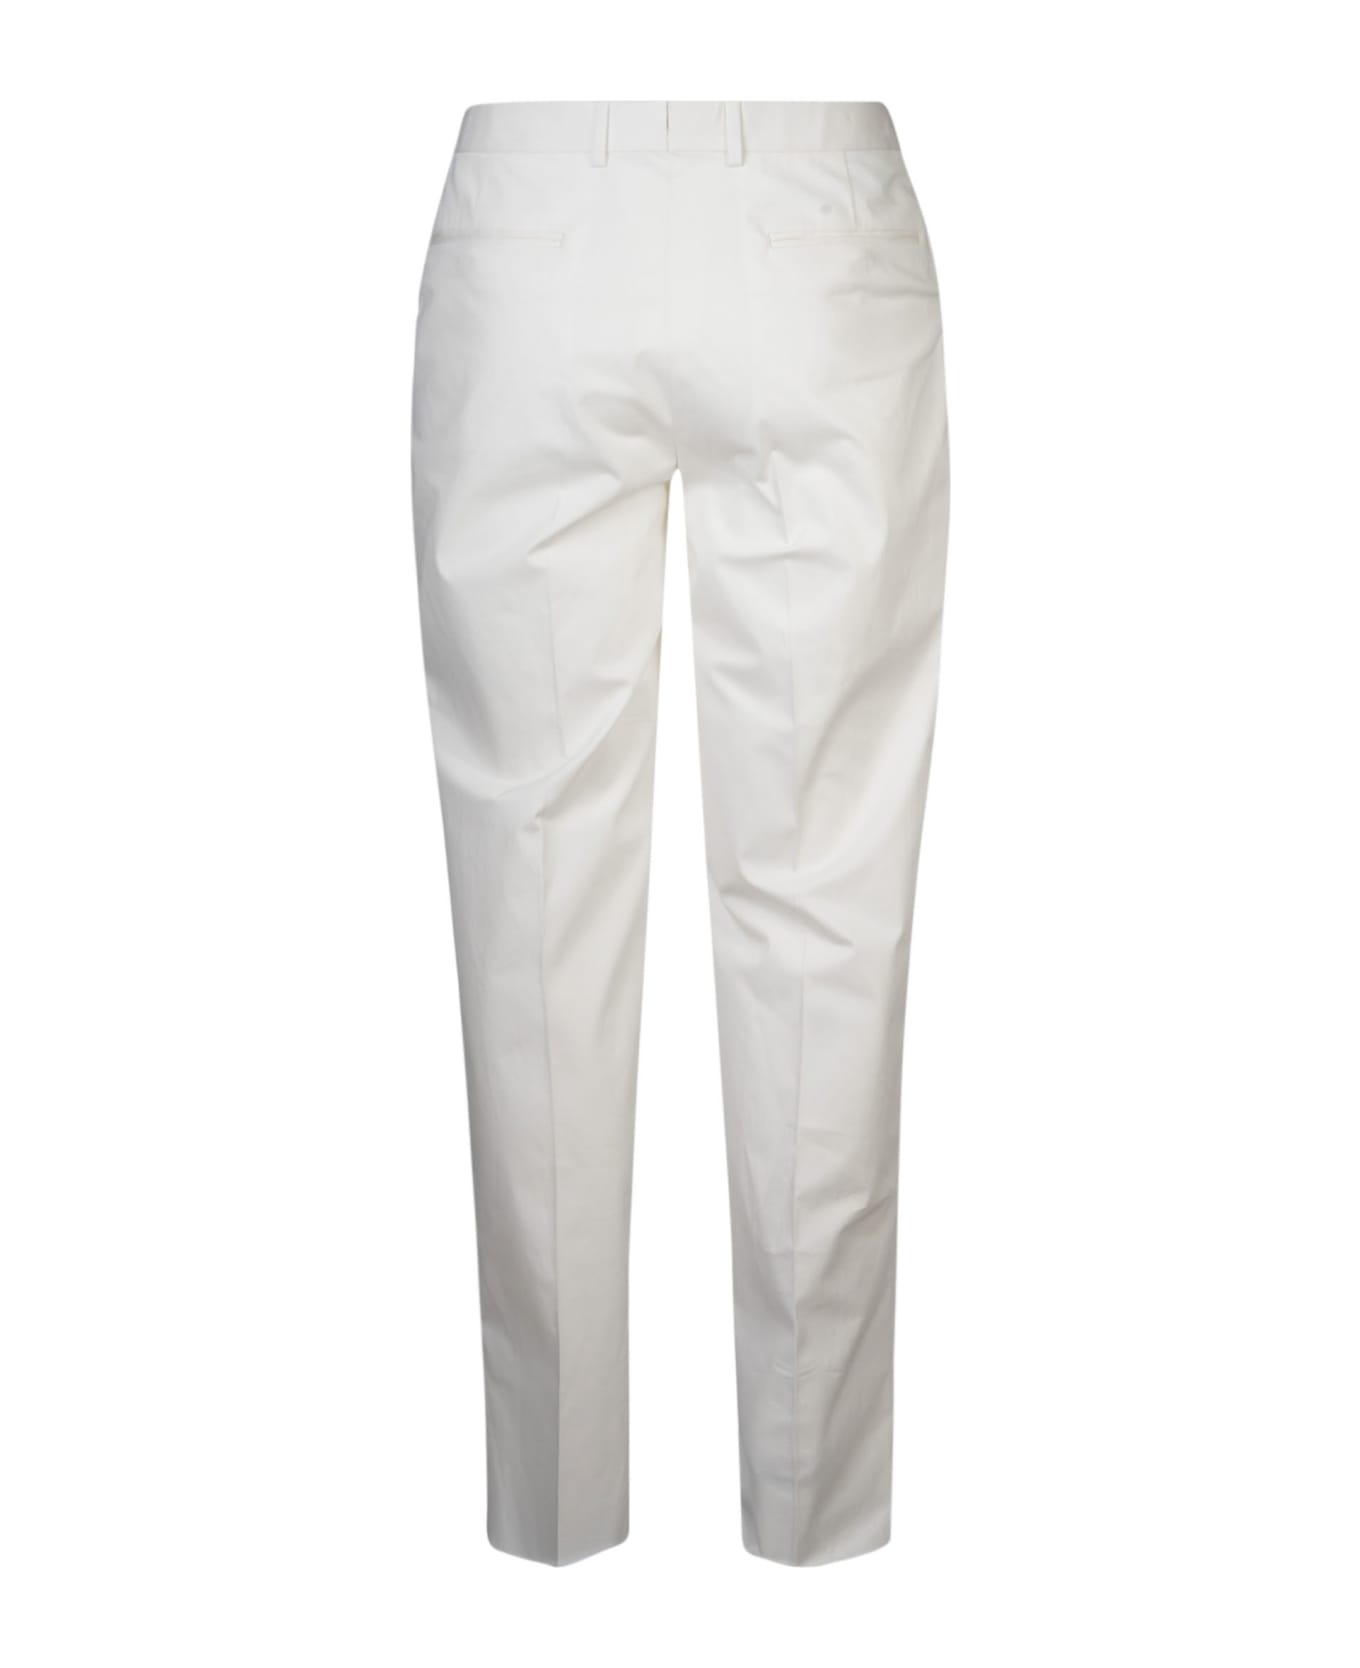 Zegna Wrapped Lock Trousers - C